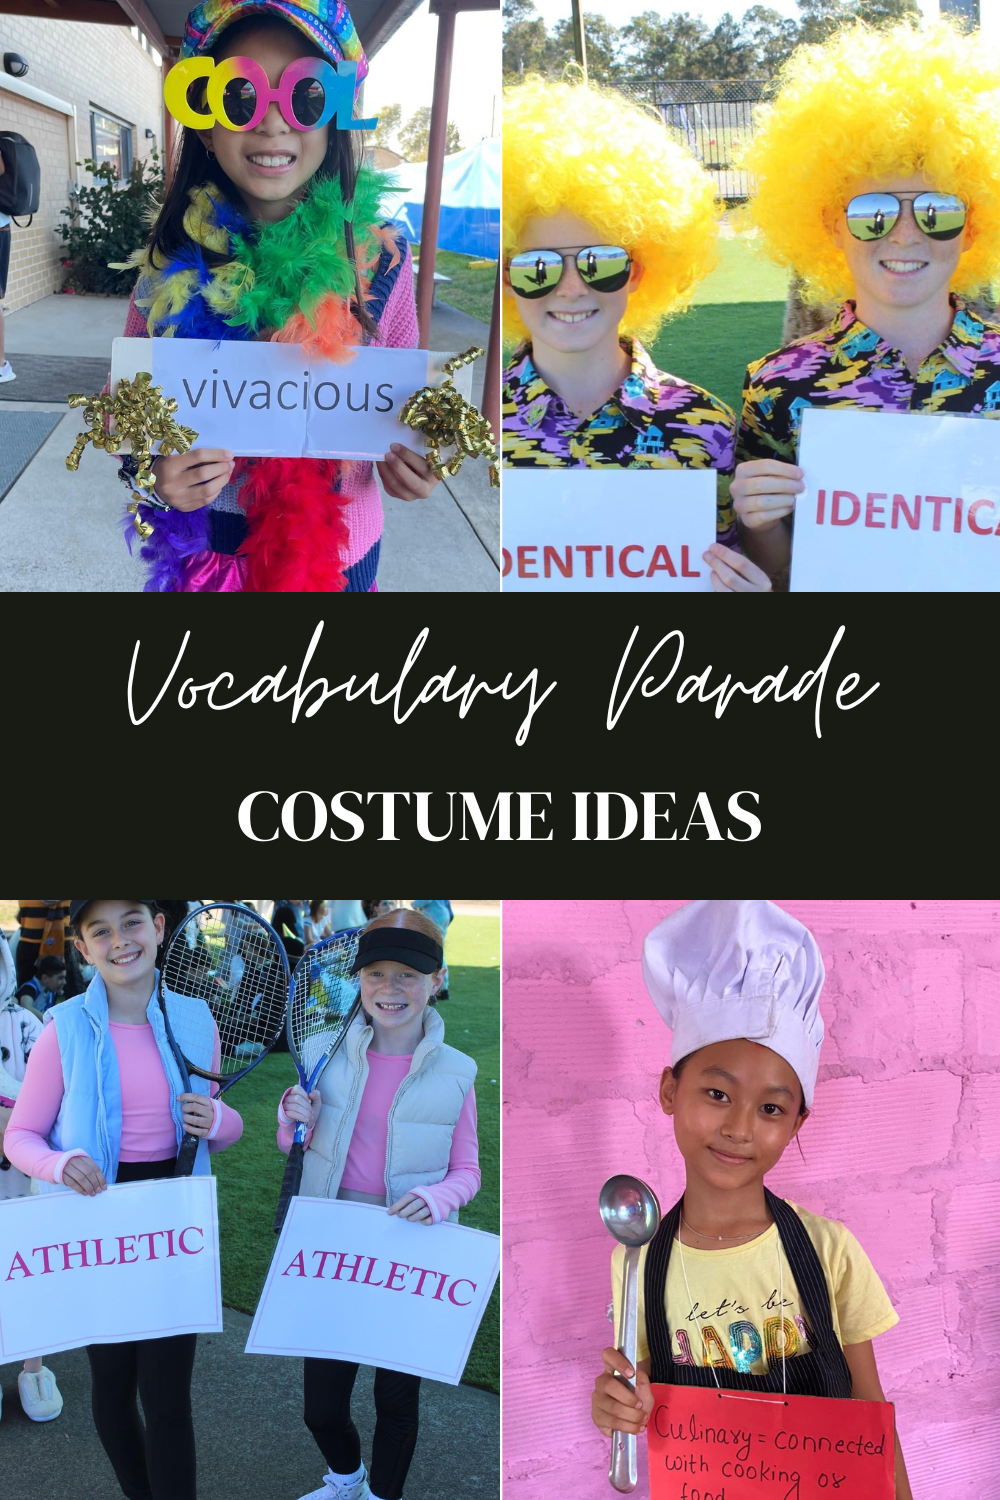 12 Quick and Easy Costume Ideas for the Vocabulary Parade | Finding Mandee